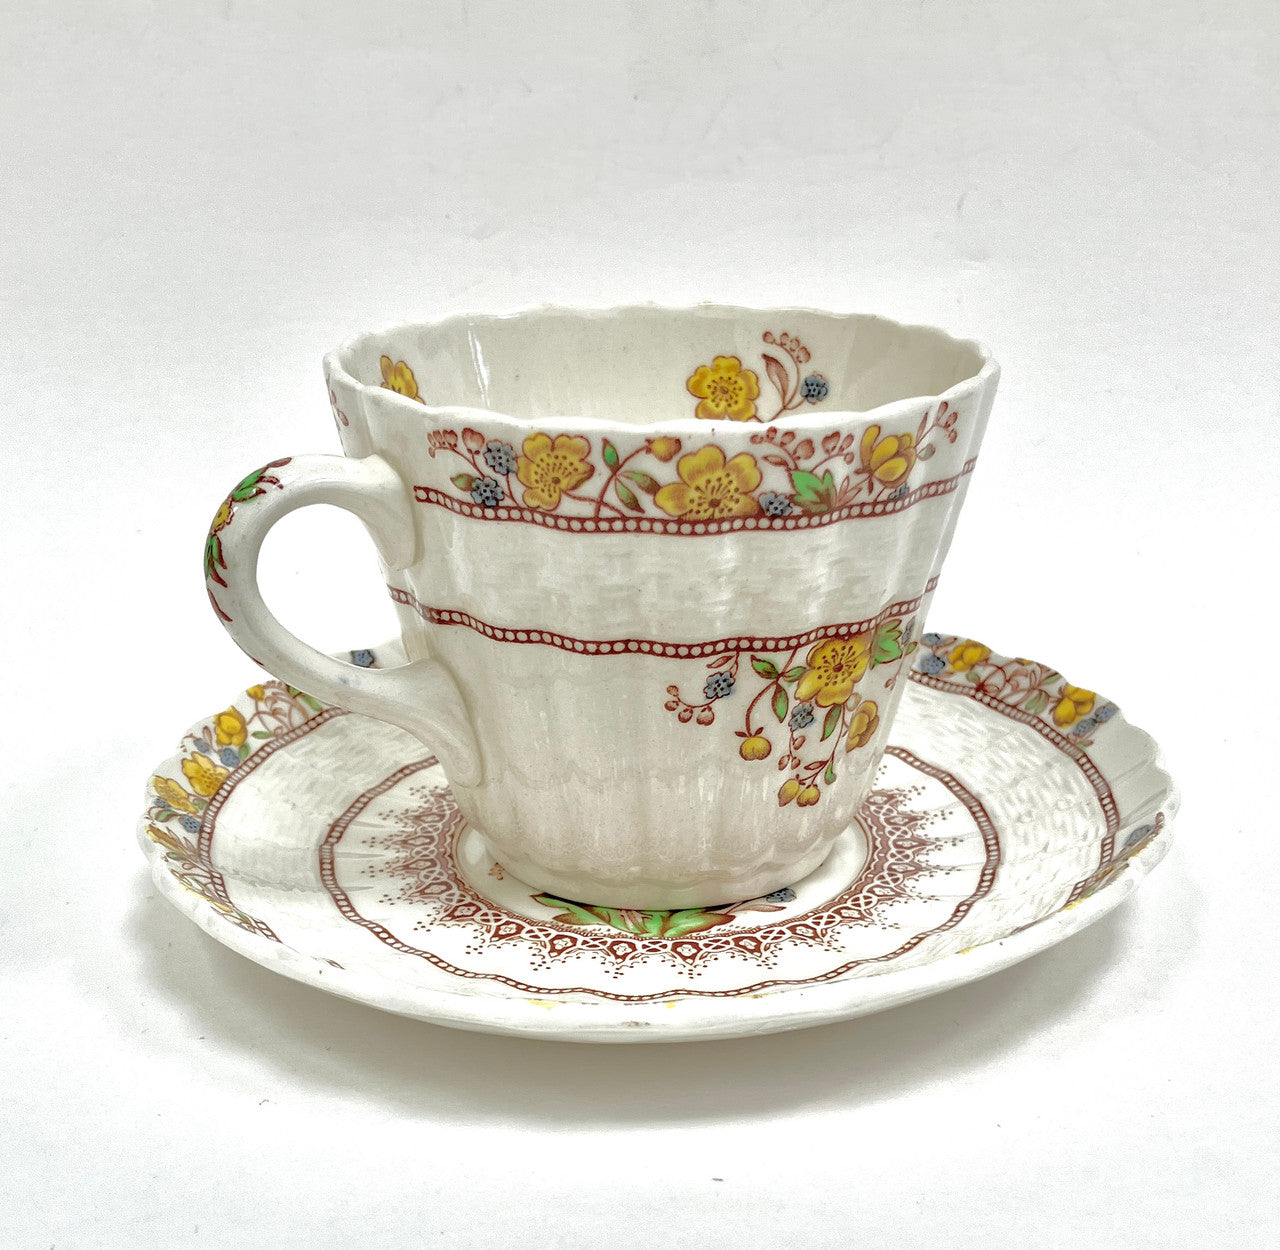 Spode, Copeland, Buttercup, Butter cup, Cup and Saucer, Teacup and Saucer, Tea cup and Saucer, Vintage, Antique